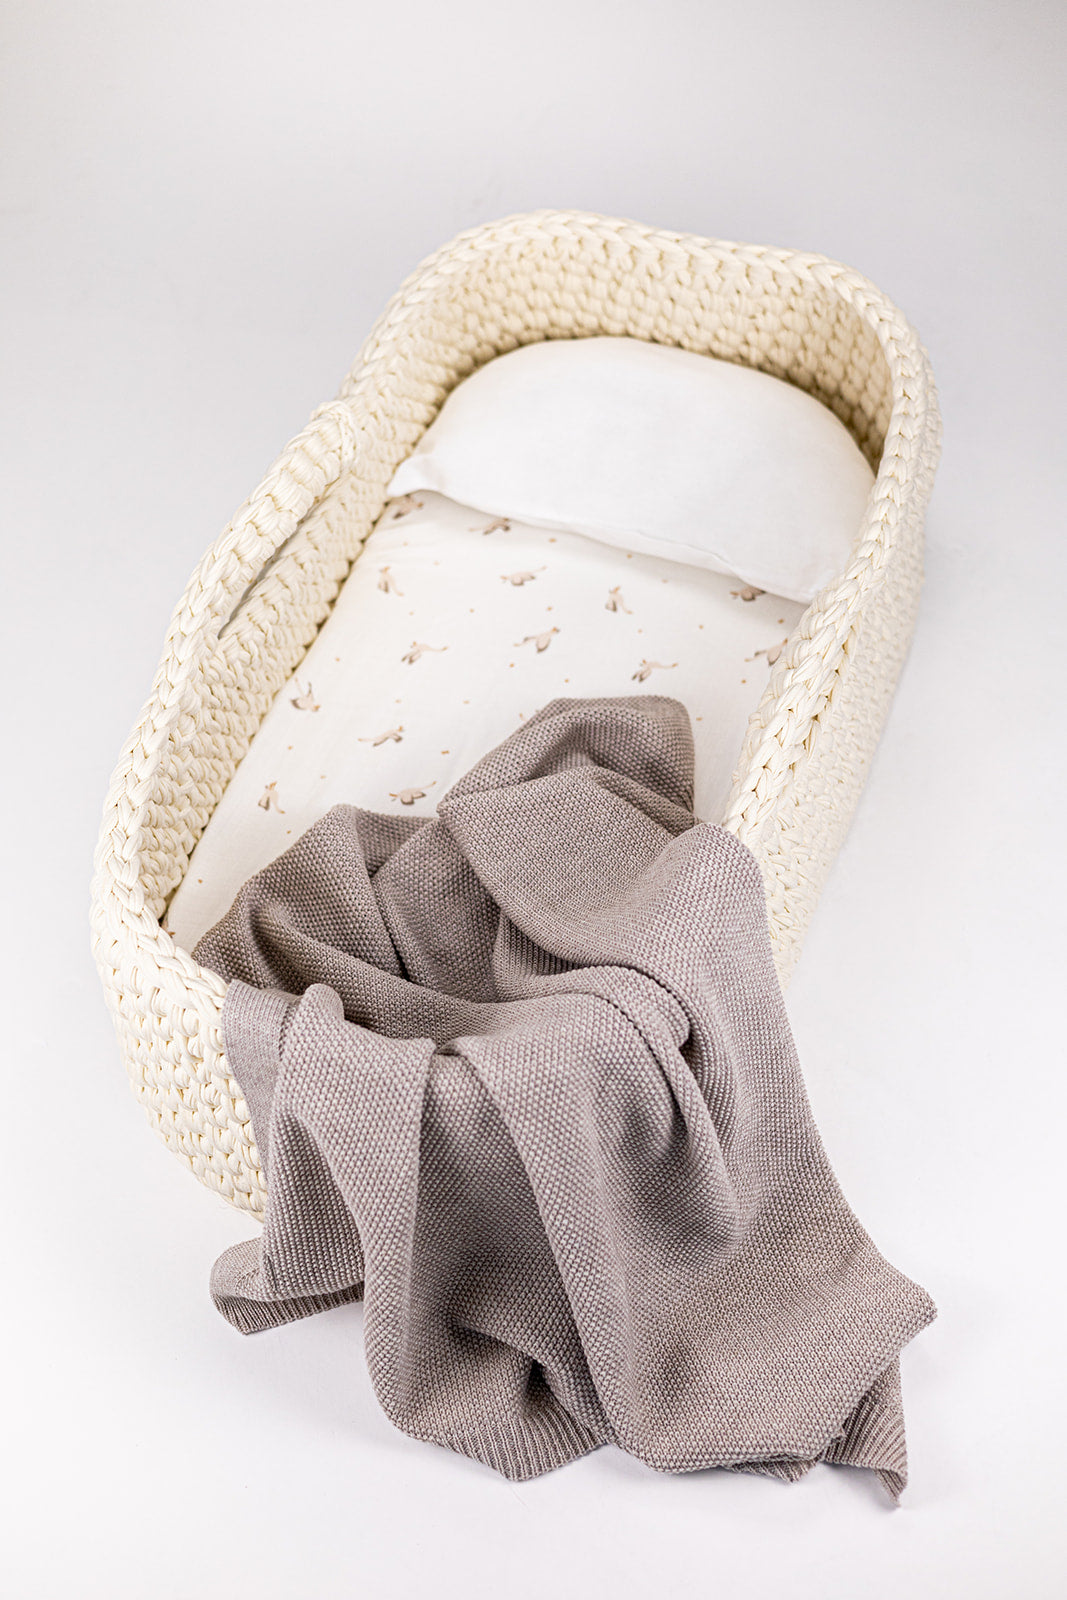 Geese Sheet for the Carrycot: Peaceful and Enchanting Nights of Sleep 